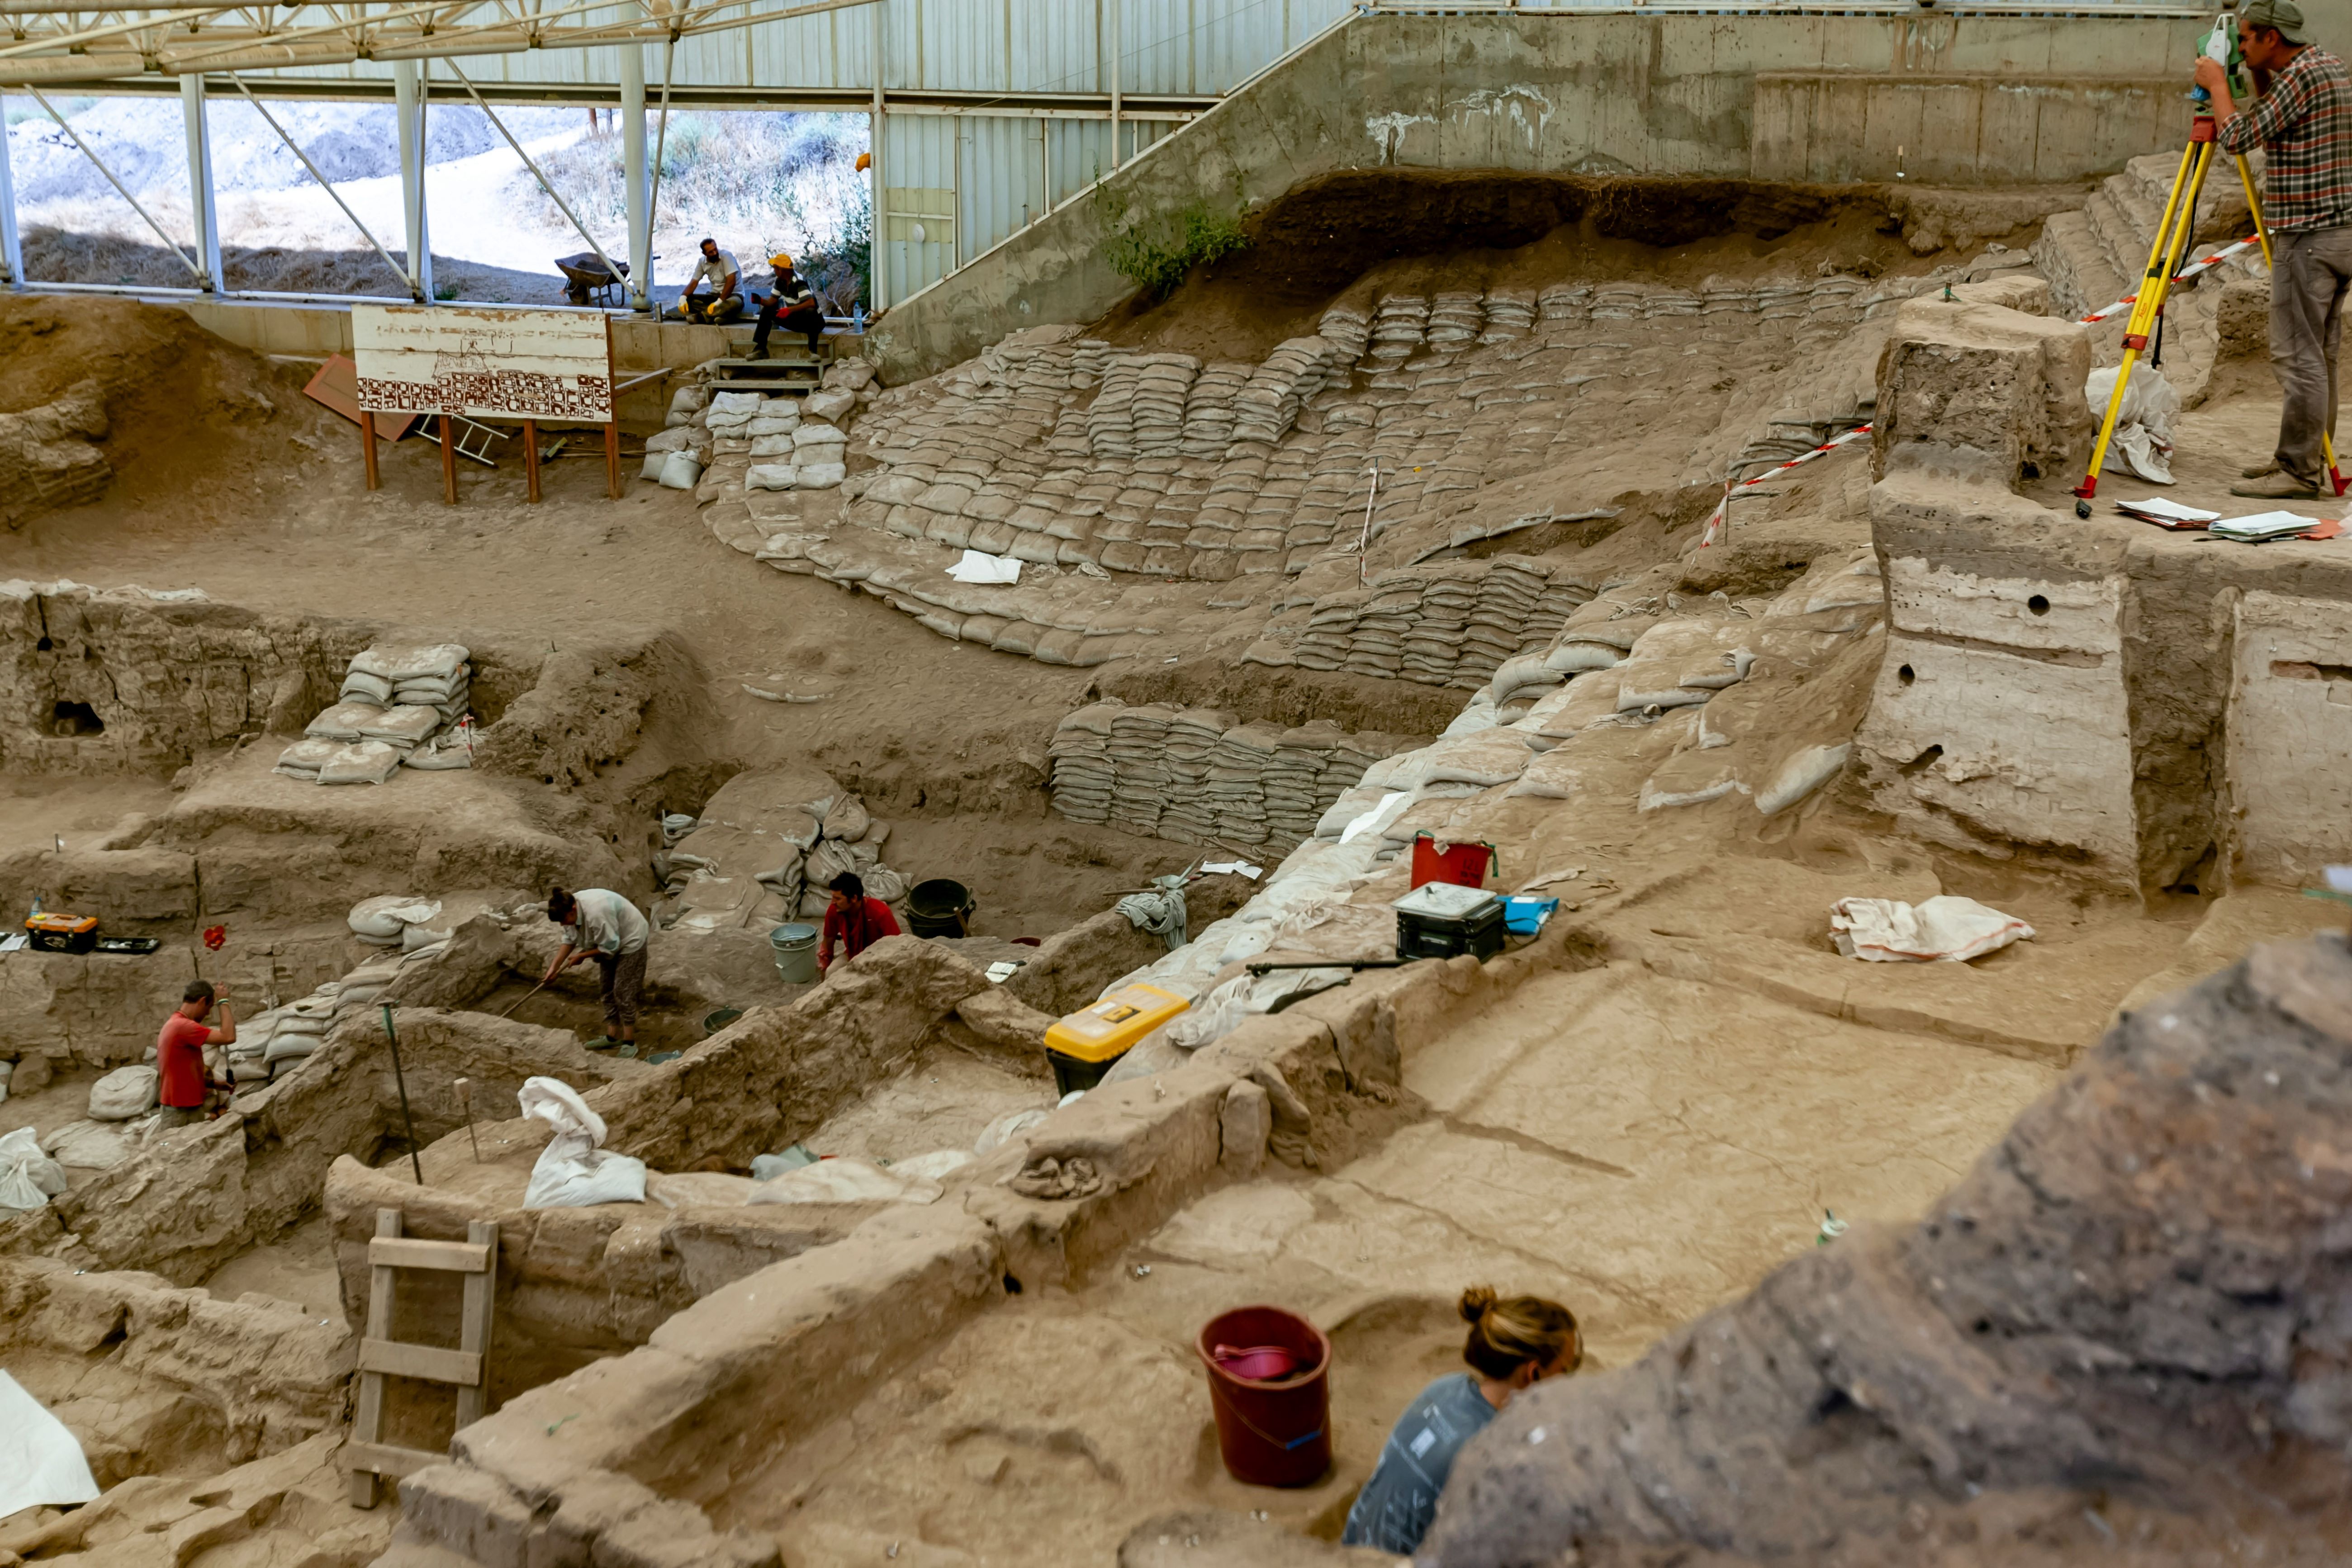  An archaeological dig site, where a housing complex is being excavated.